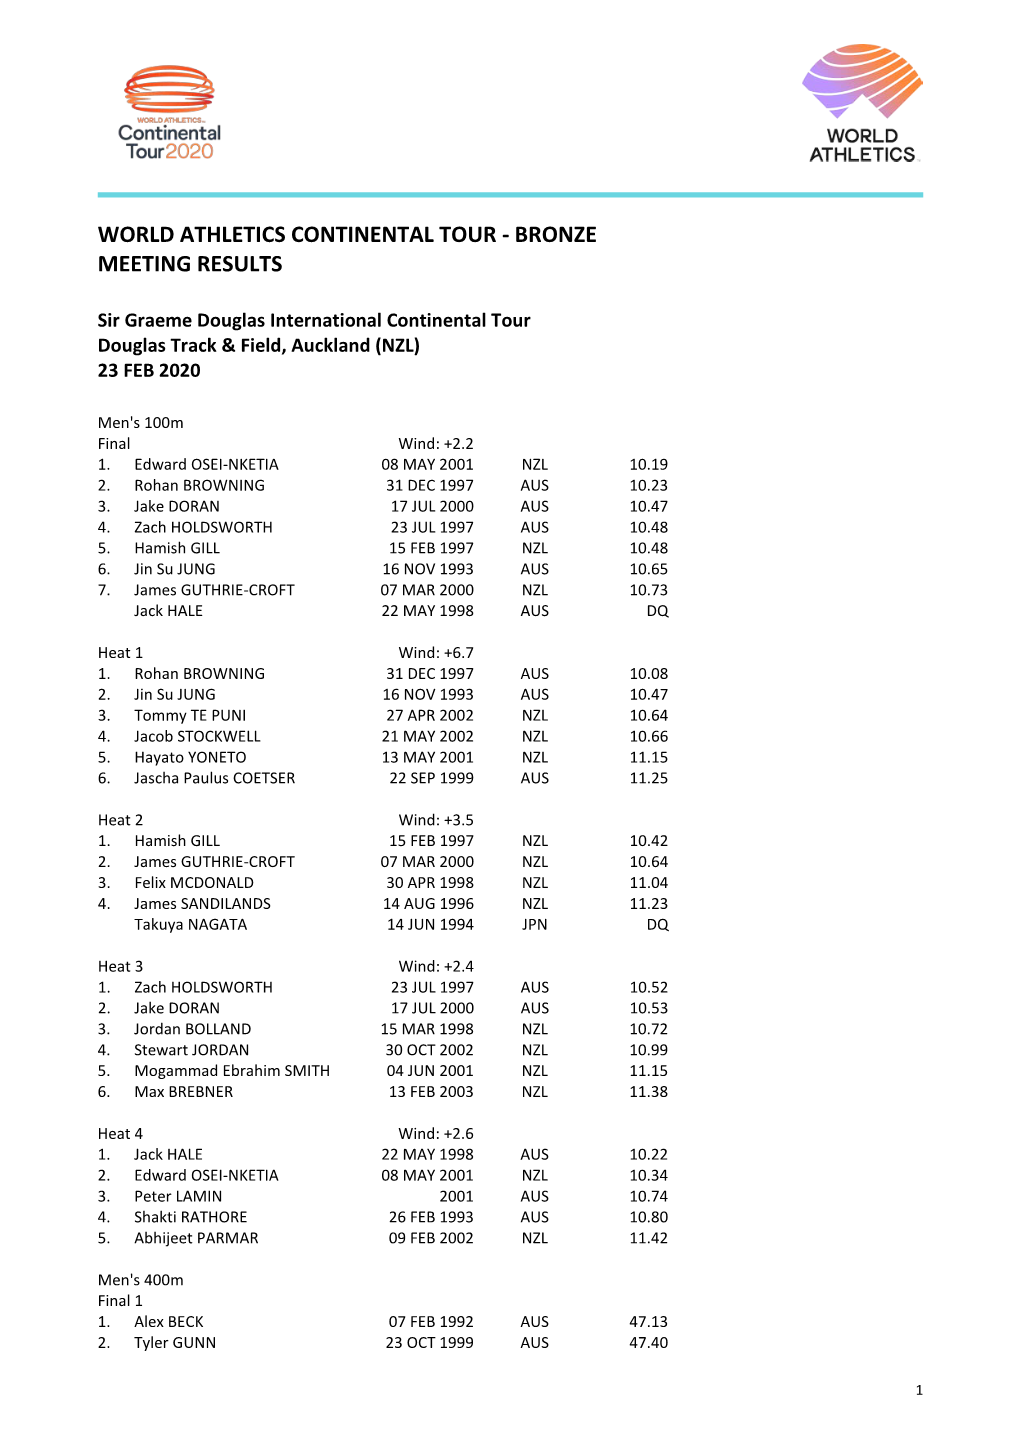 World Athletics Continental Tour - Bronze Meeting Results